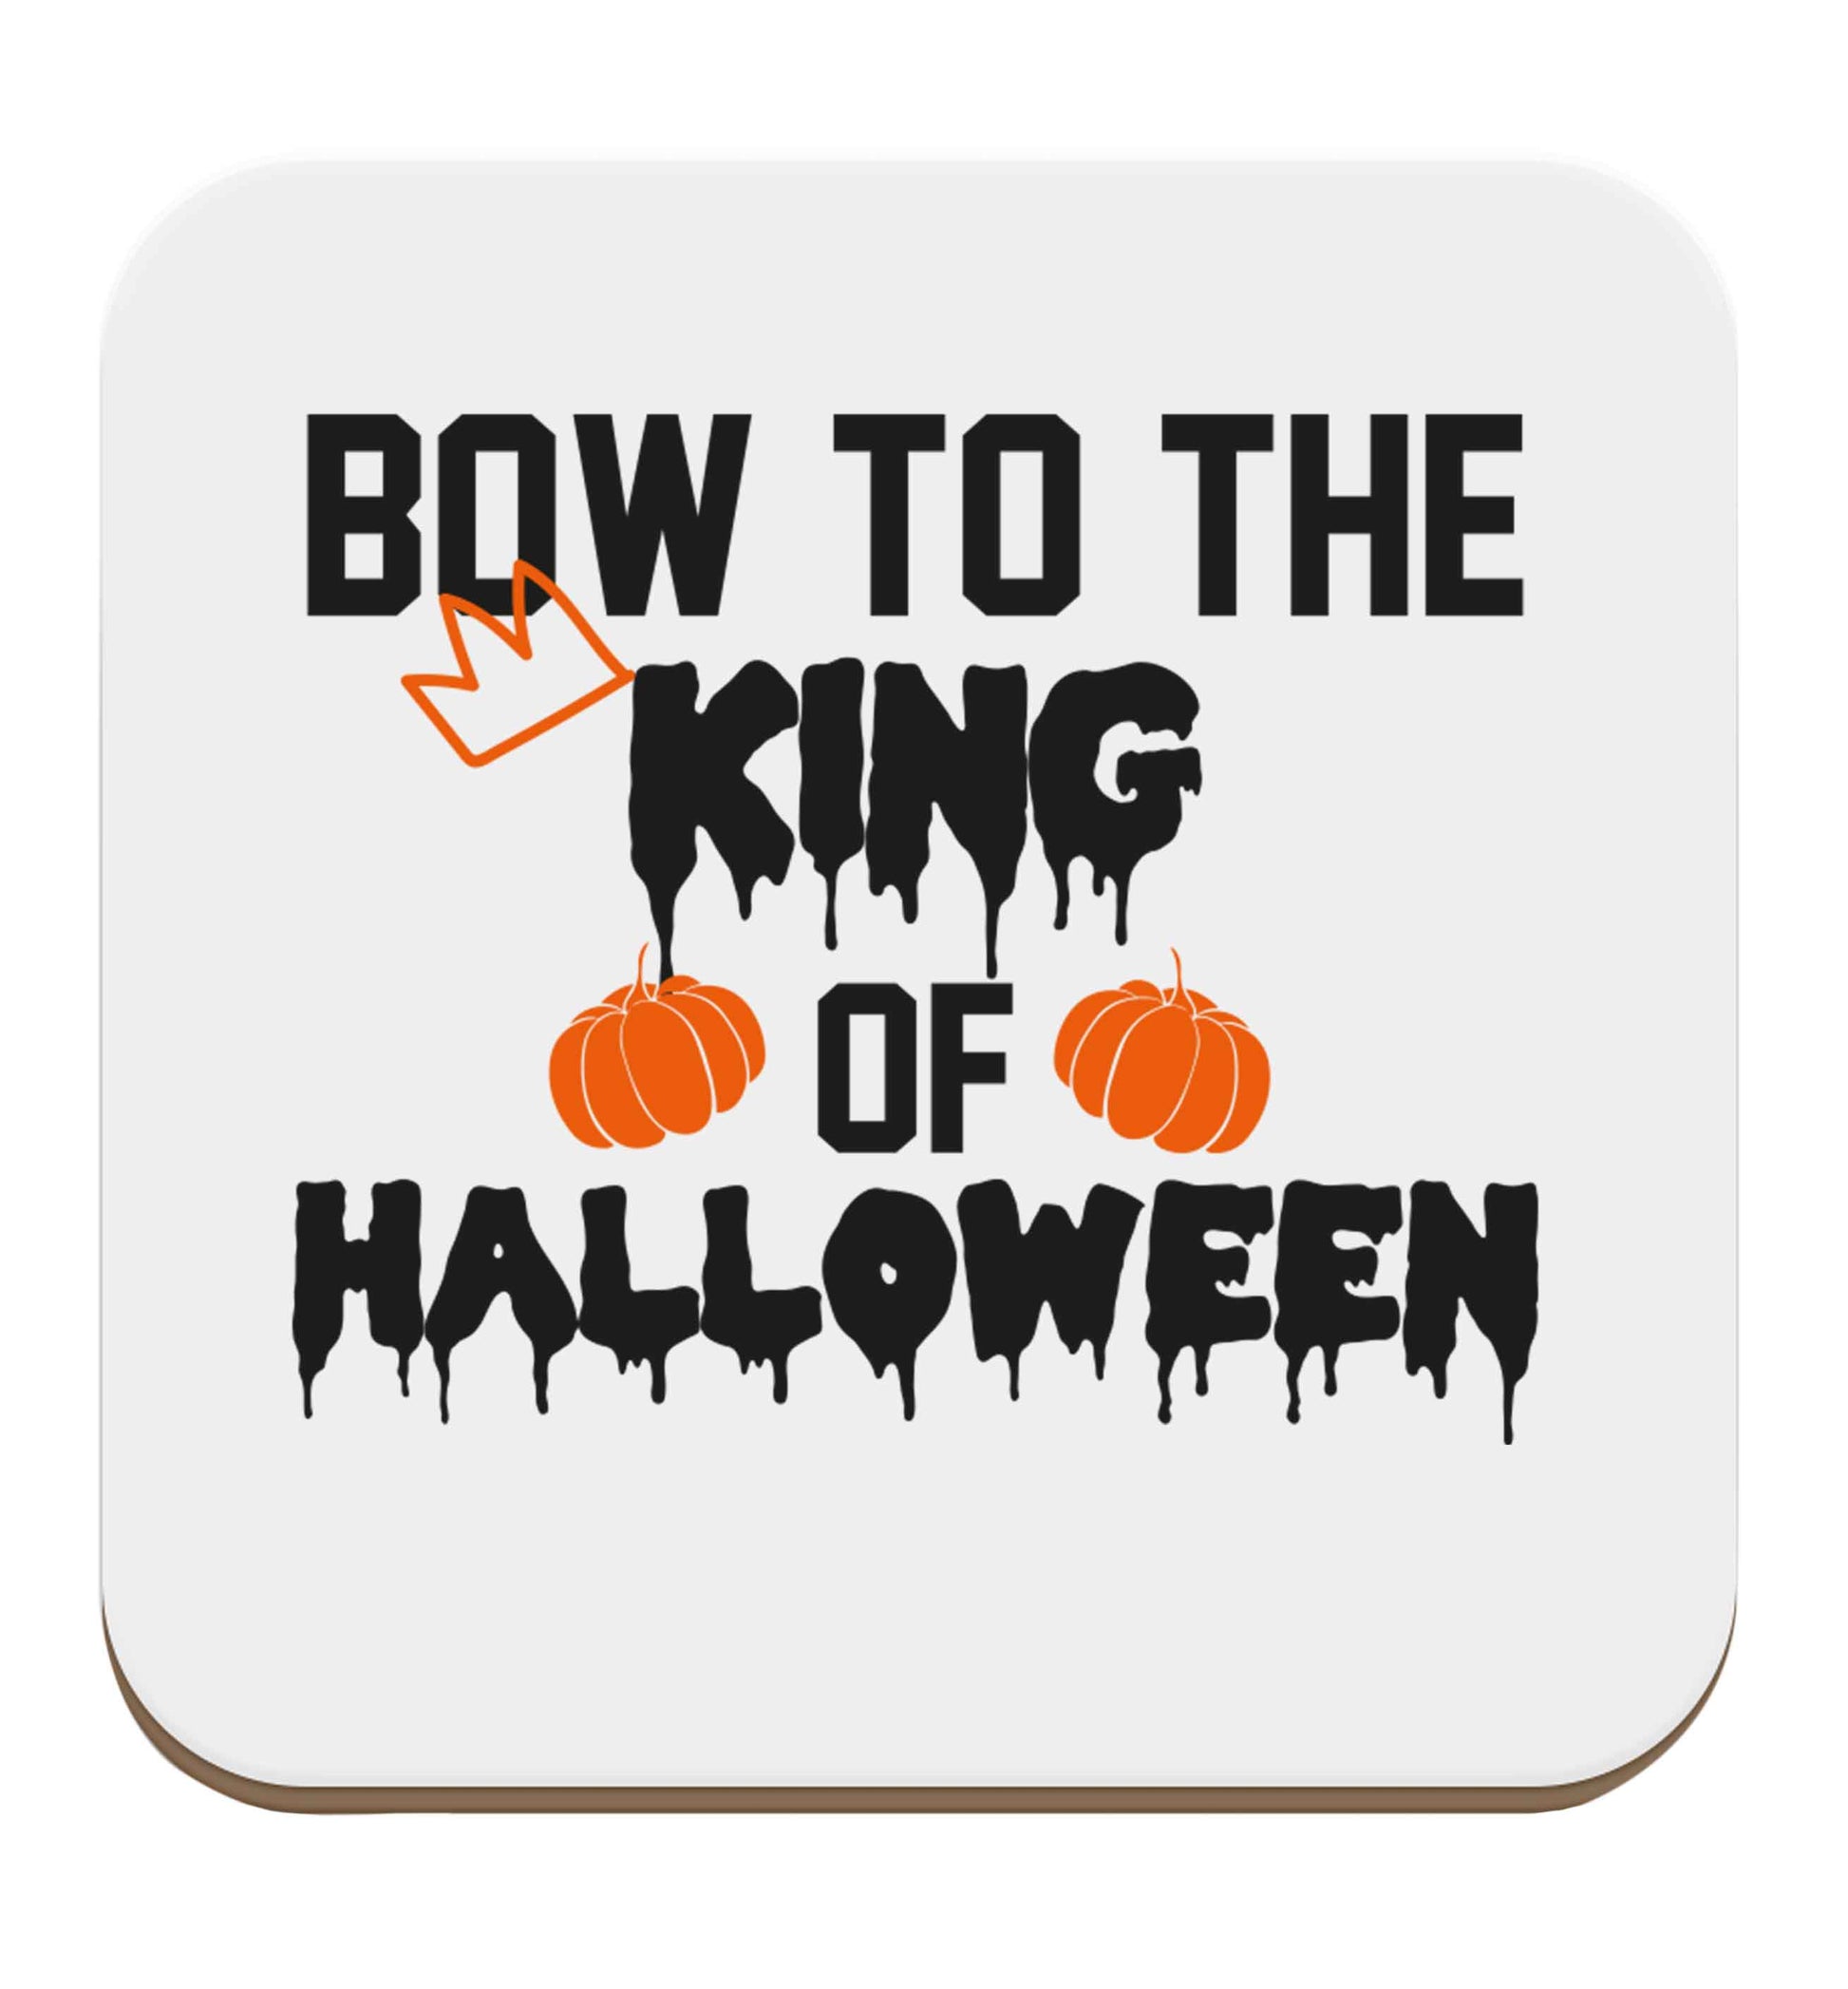 Bow to the King of halloween set of four coasters